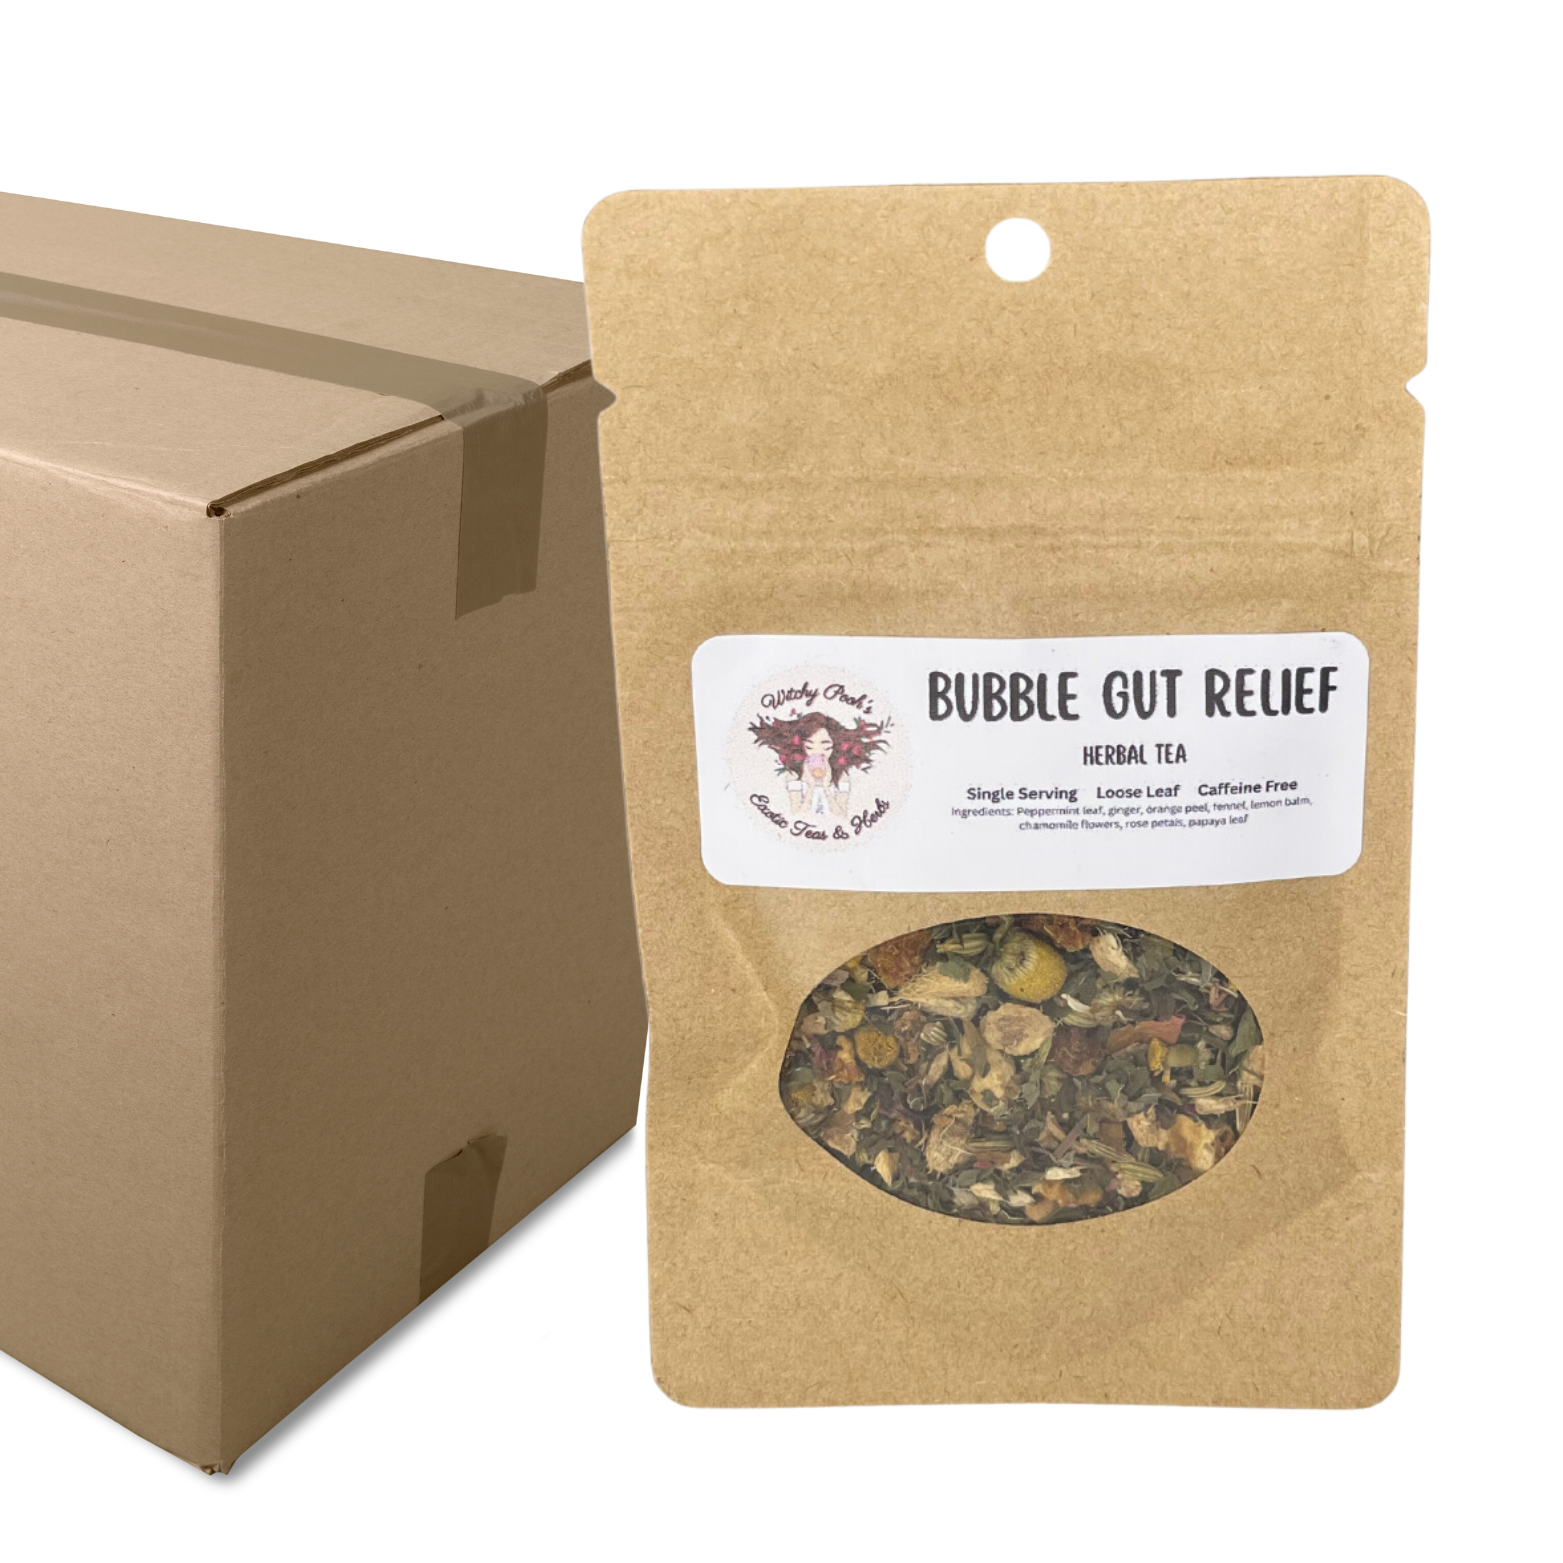 Witchy Pooh's Bubble Gut Relief Loose Leaf Herbal Functional Tea, Caffeine Free, For Digestive Issues-17